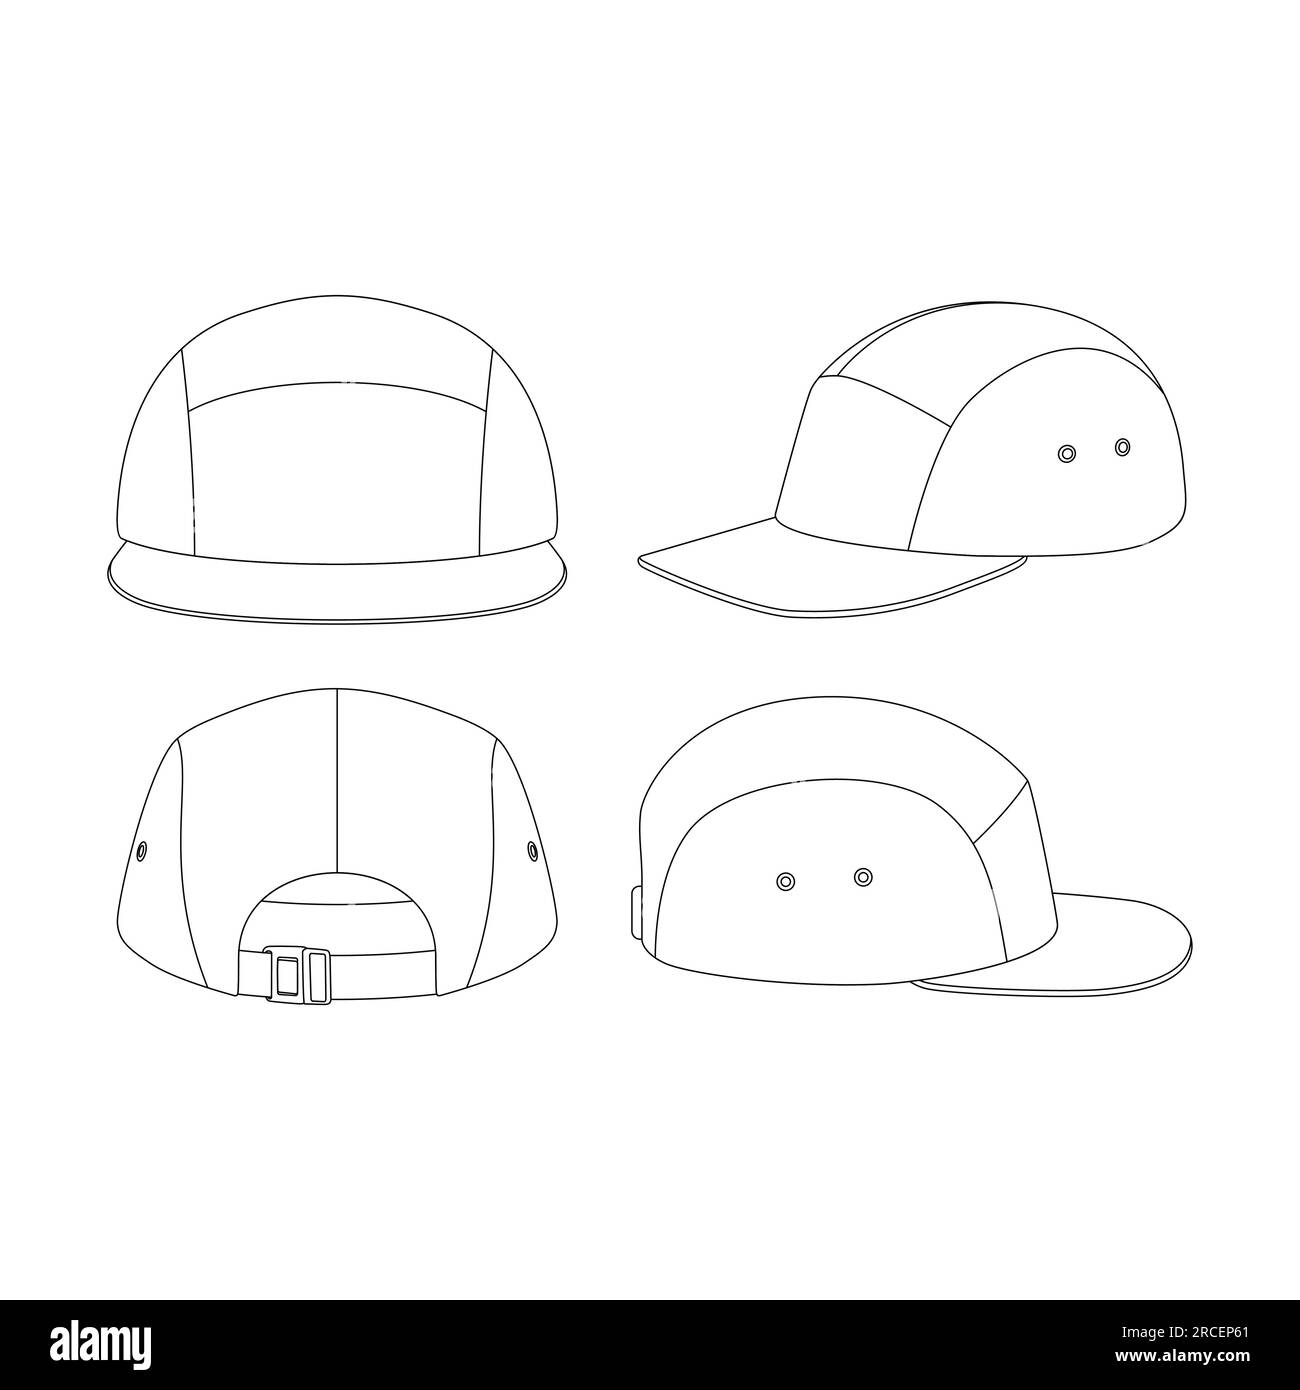 Baseball hat outline Black and White Stock Photos & Images - Alamy